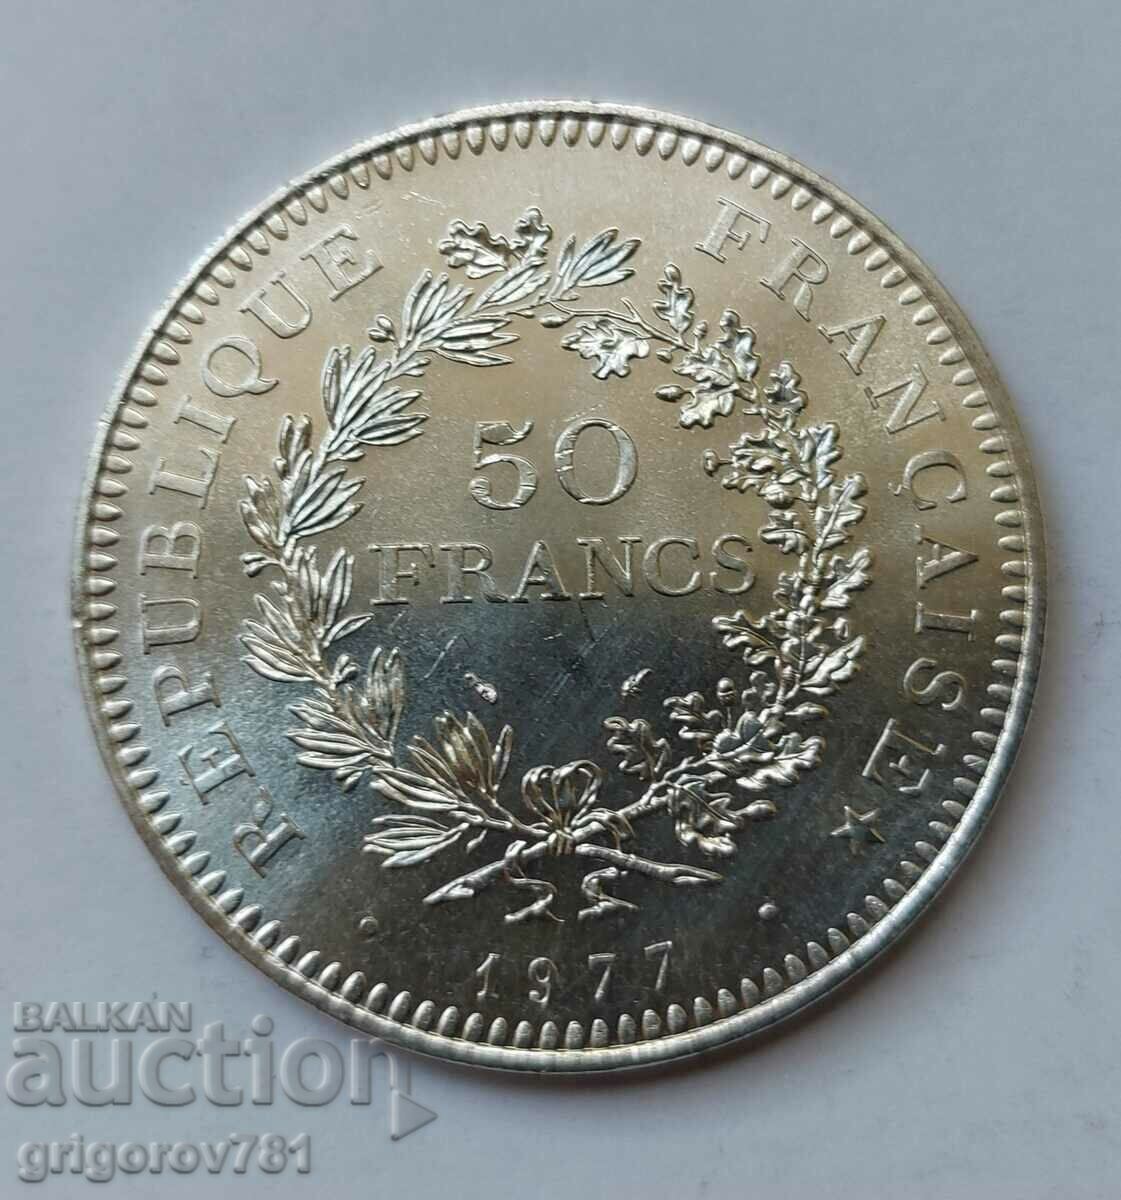 50 Francs Silver France 1977 - Silver Coin #44